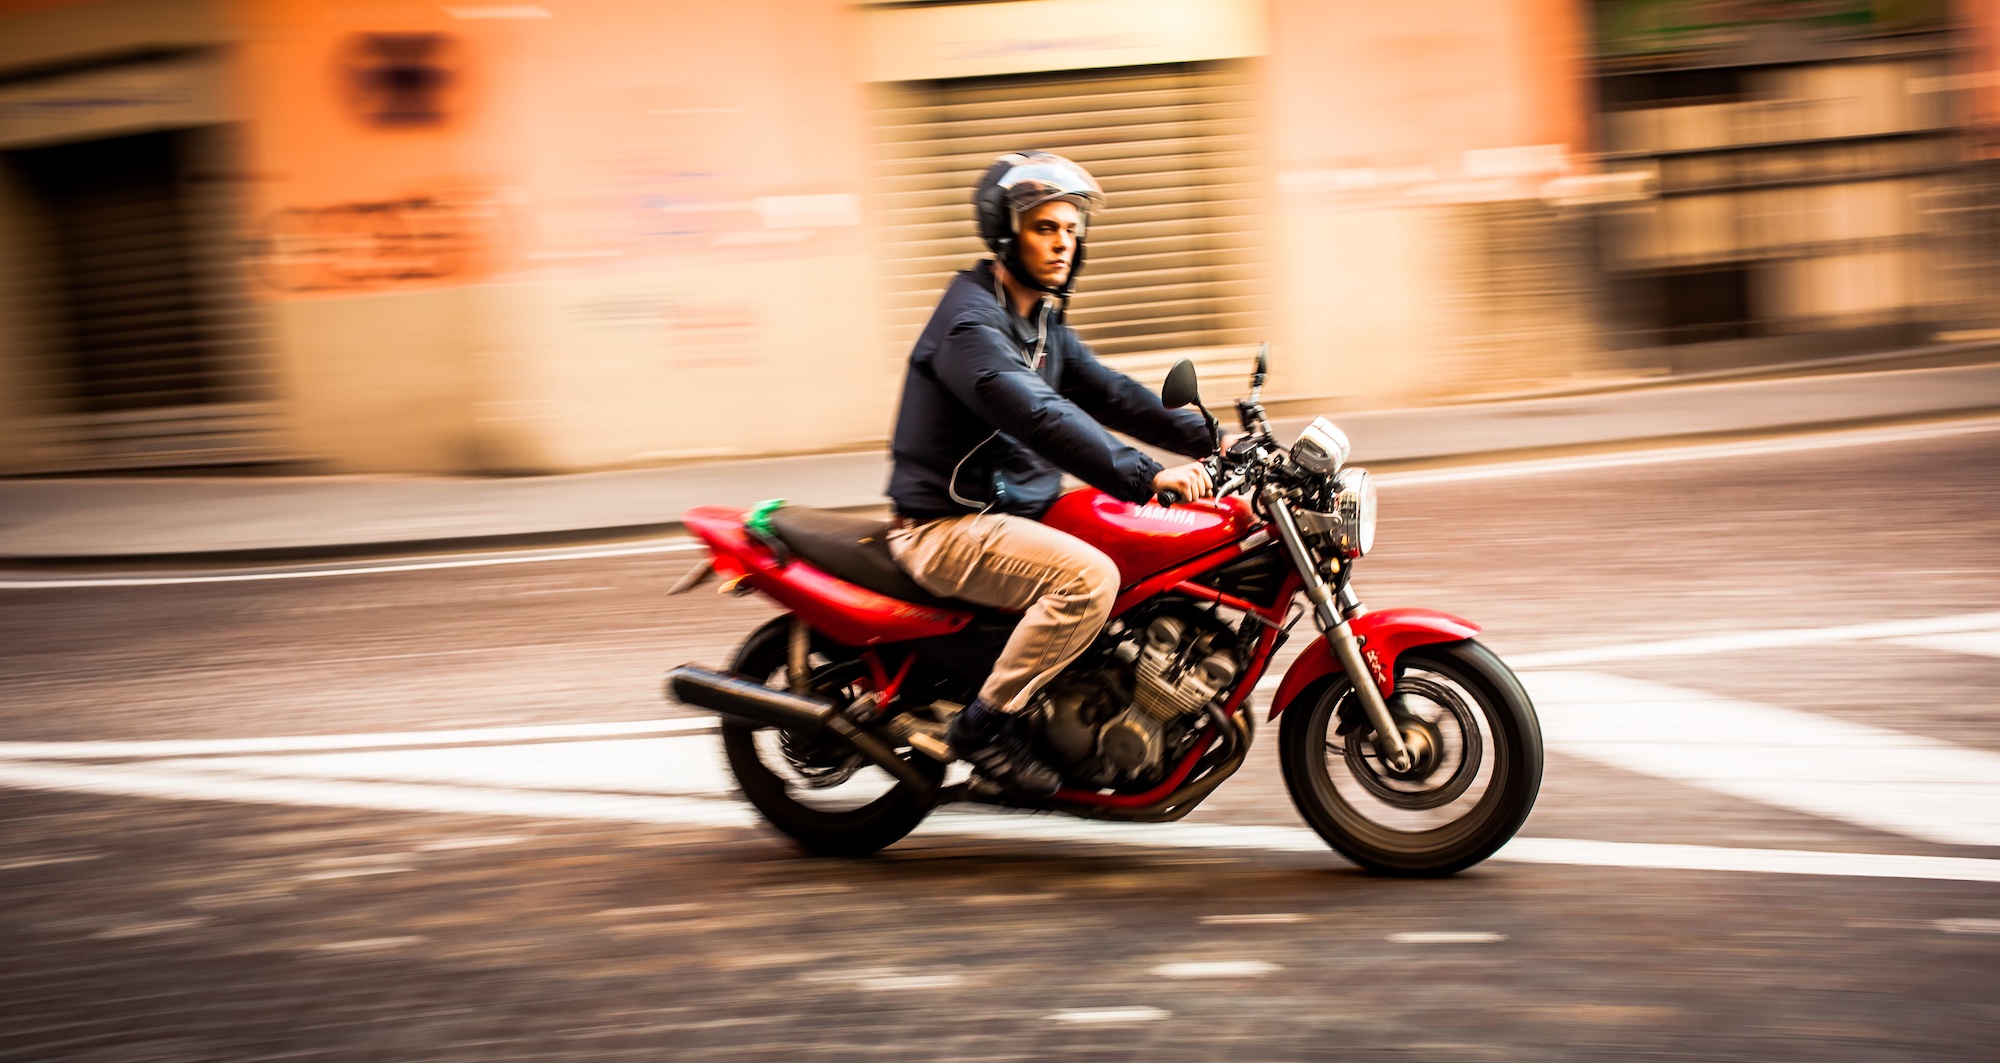 A man rides a motorcycle through the streets of Naples, Italy, in October 2012. One Italian man's motorcycle accident caused his heart to rotate 90 degrees.